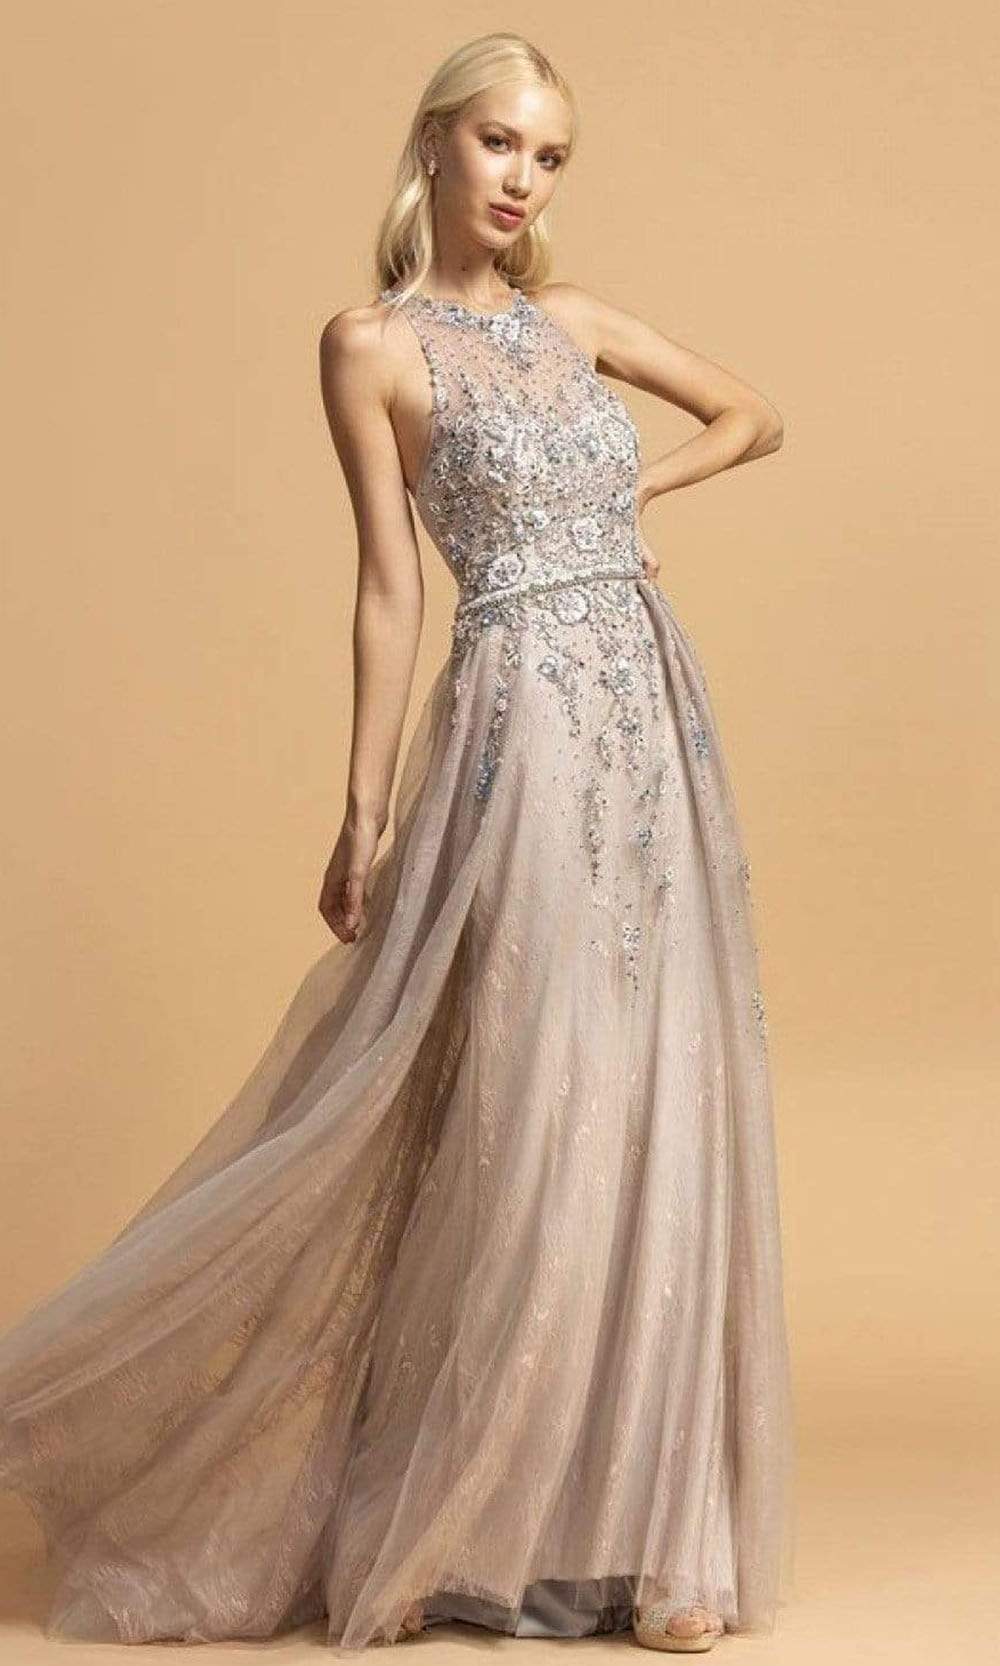 Image of Aspeed Design - L2155 Bedazzled Lace A-Line Flowy Dress